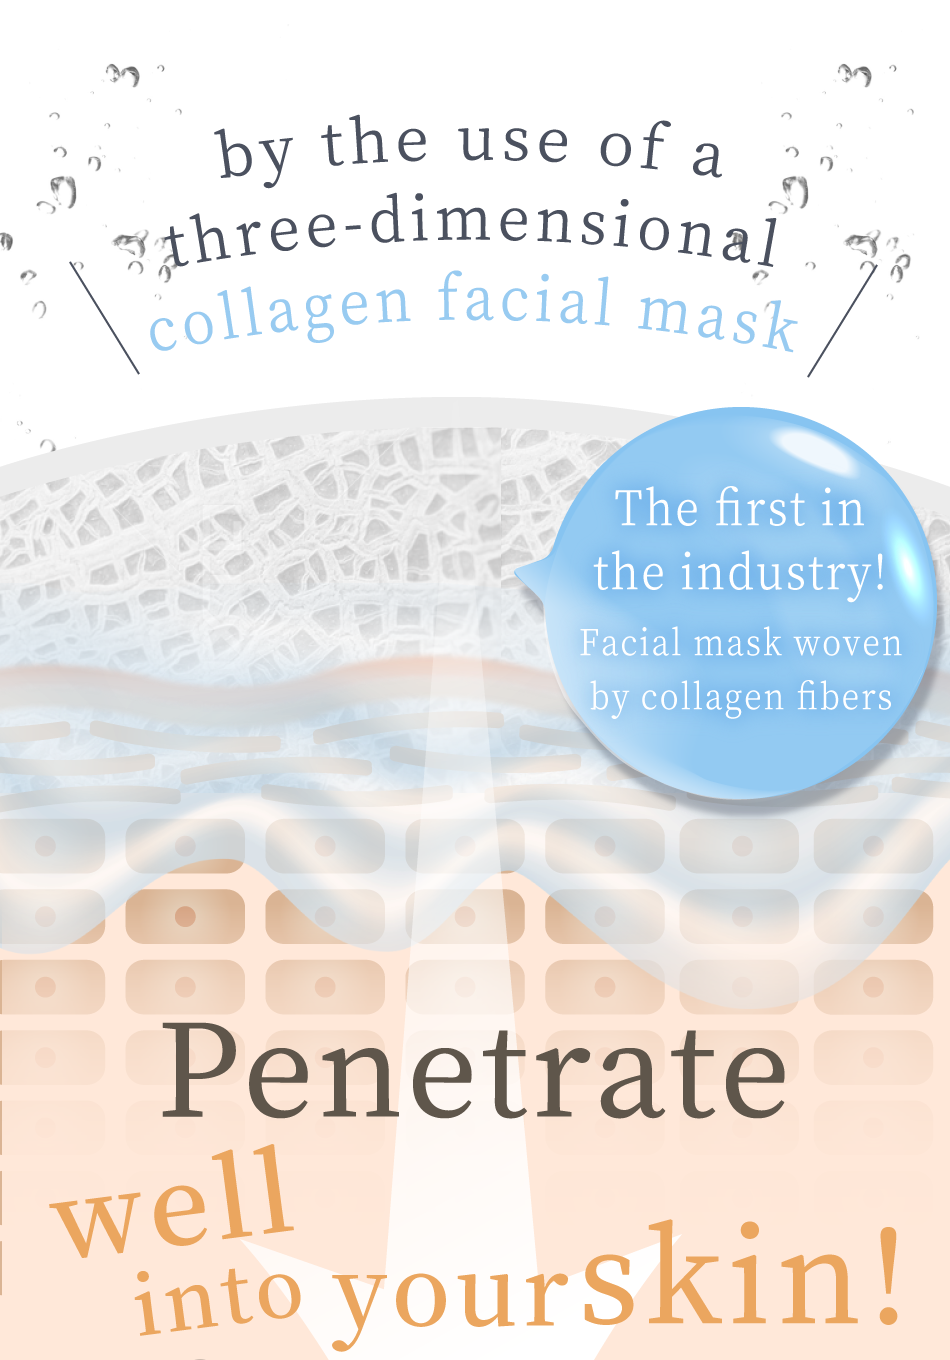 It can be achieved by the use of a three- dimensional collagen facial mask The first in the industry! Facial mask woven by collagen fibers Penetrate well into your skin!